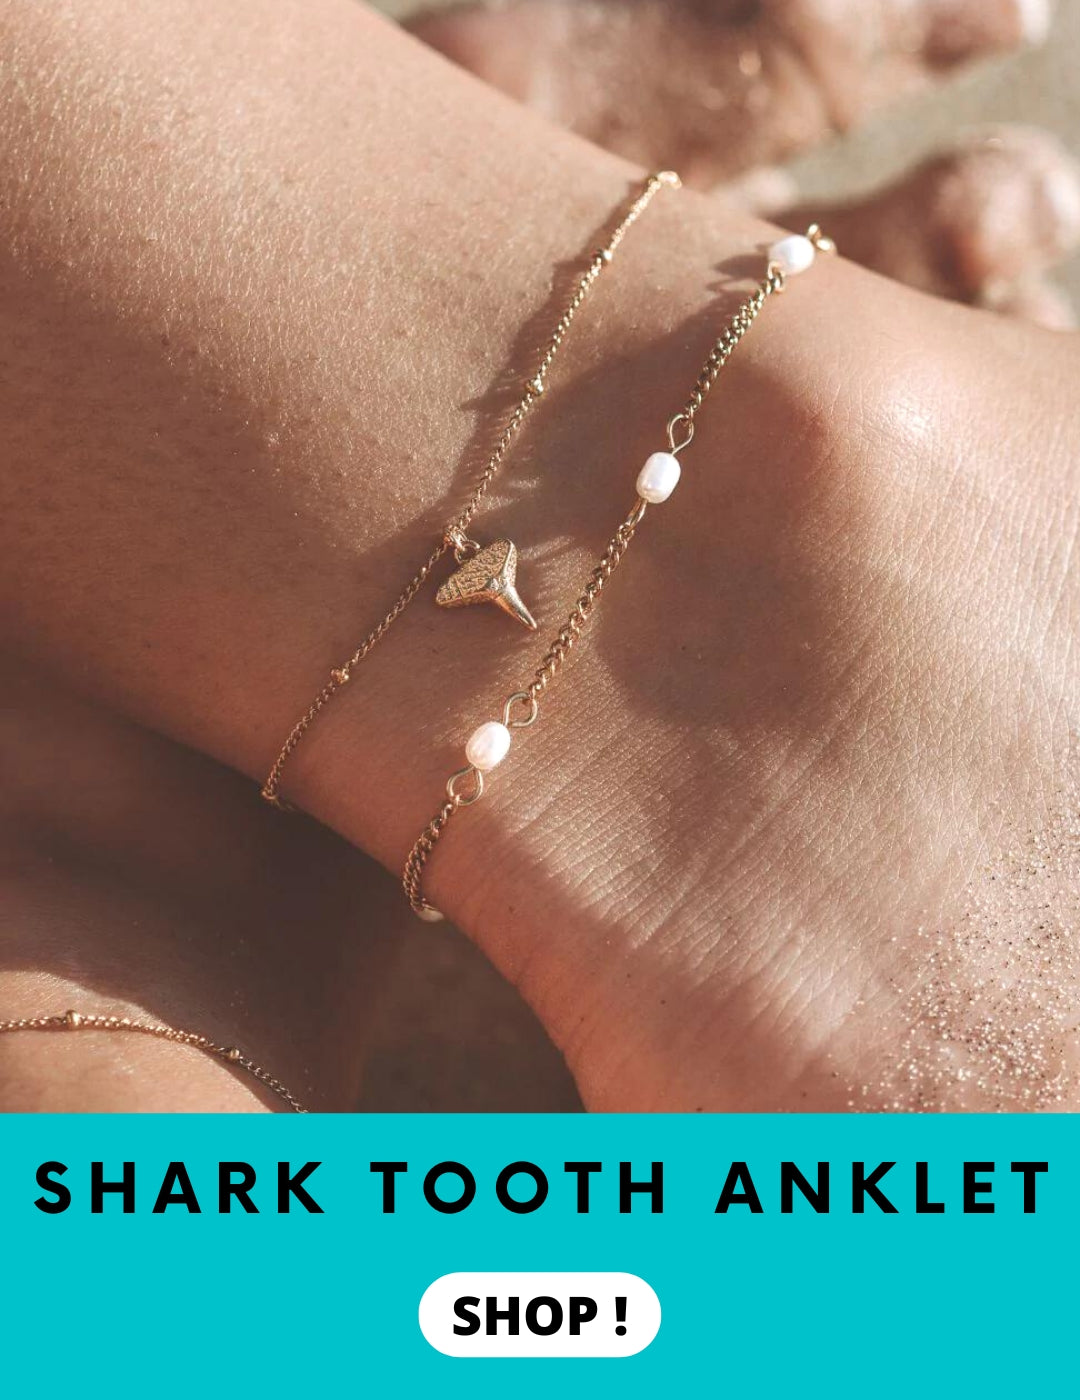 Shark tooth inspired anklet waterproof jewelry